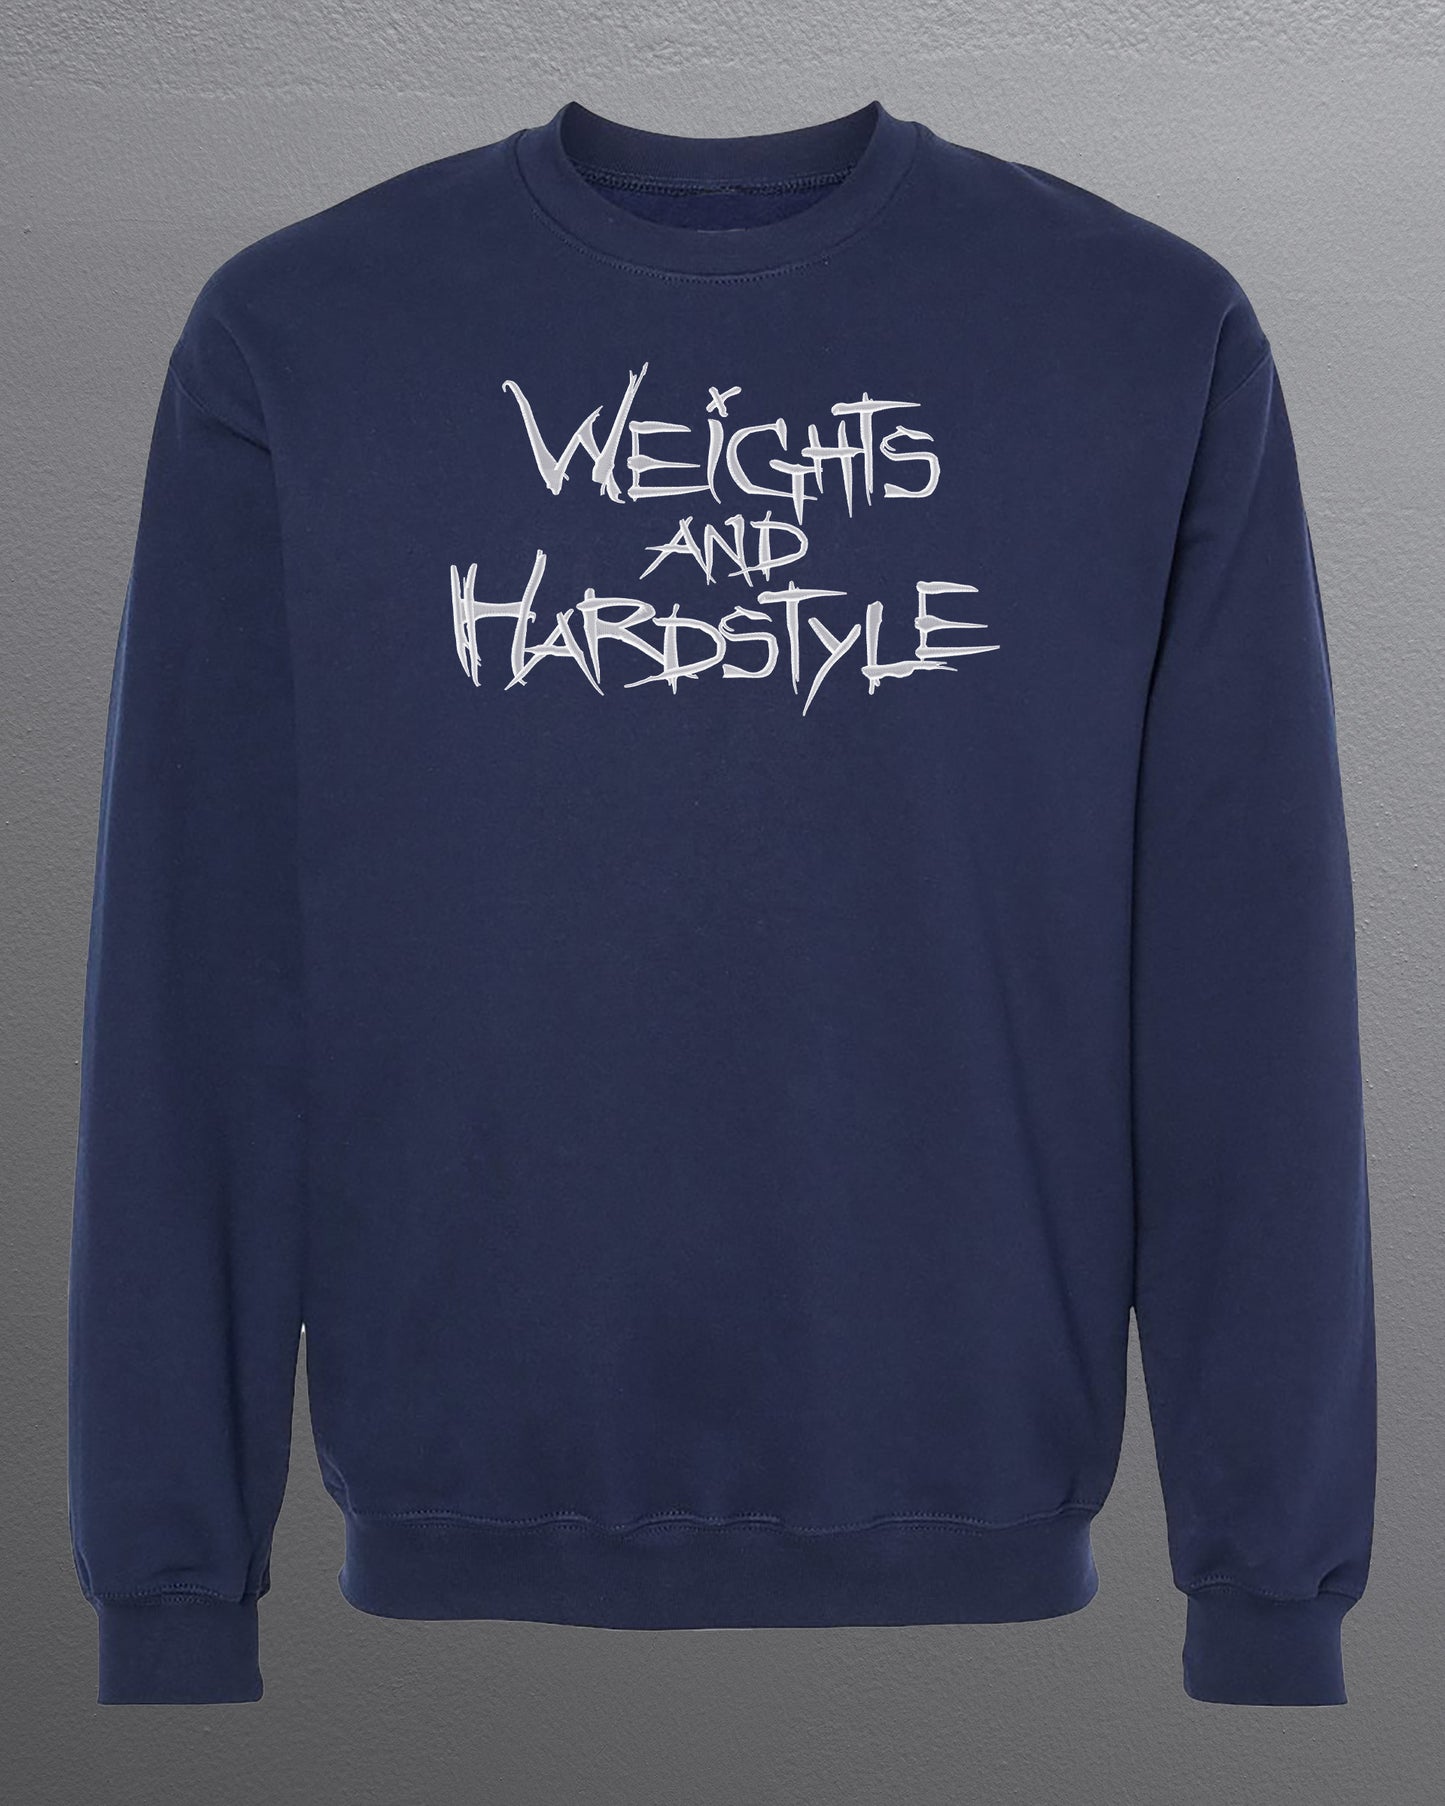 Weights and Hardstyle Crewneck